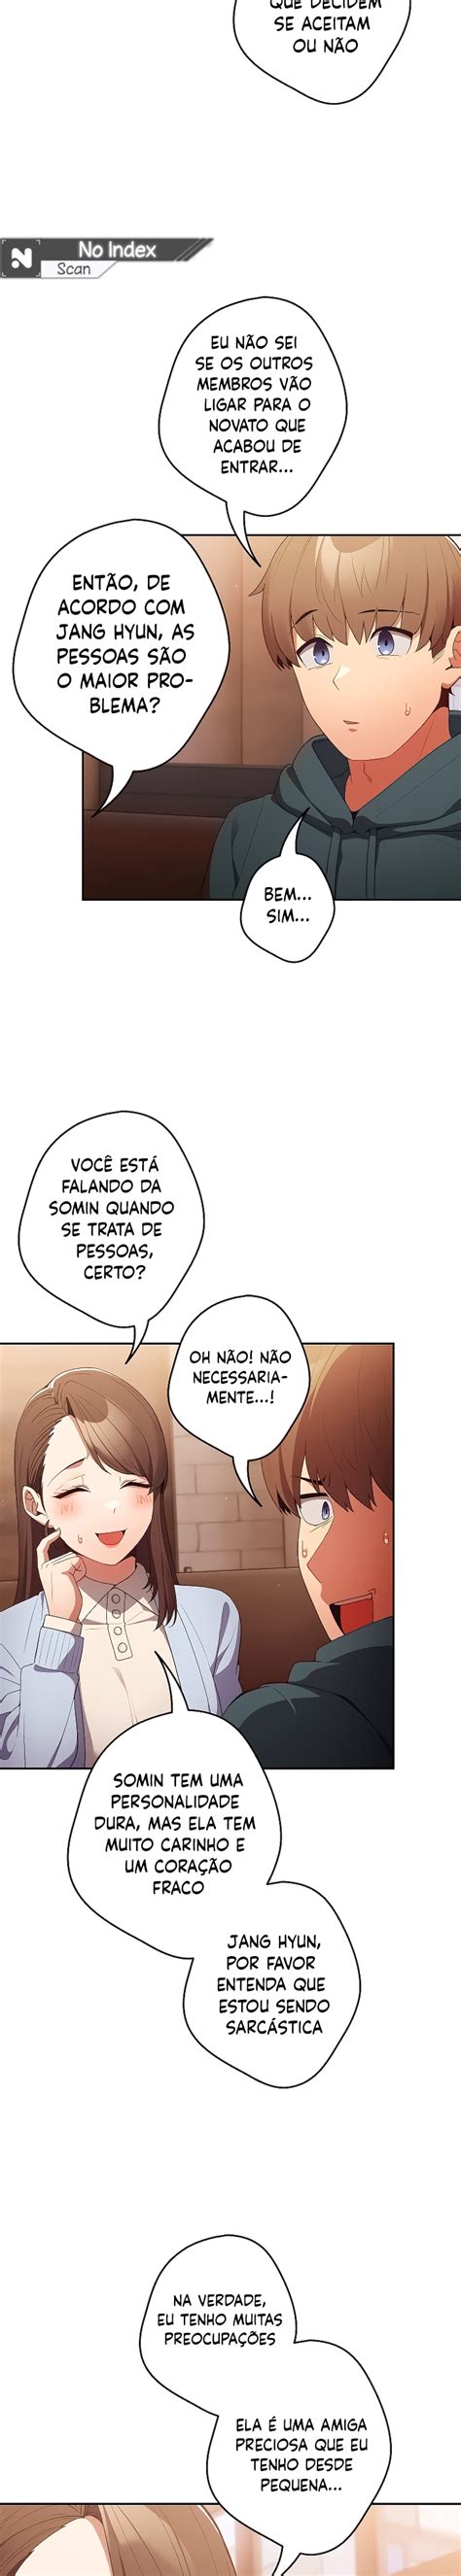 Thats not what it does Capítulo online Hentai Teca